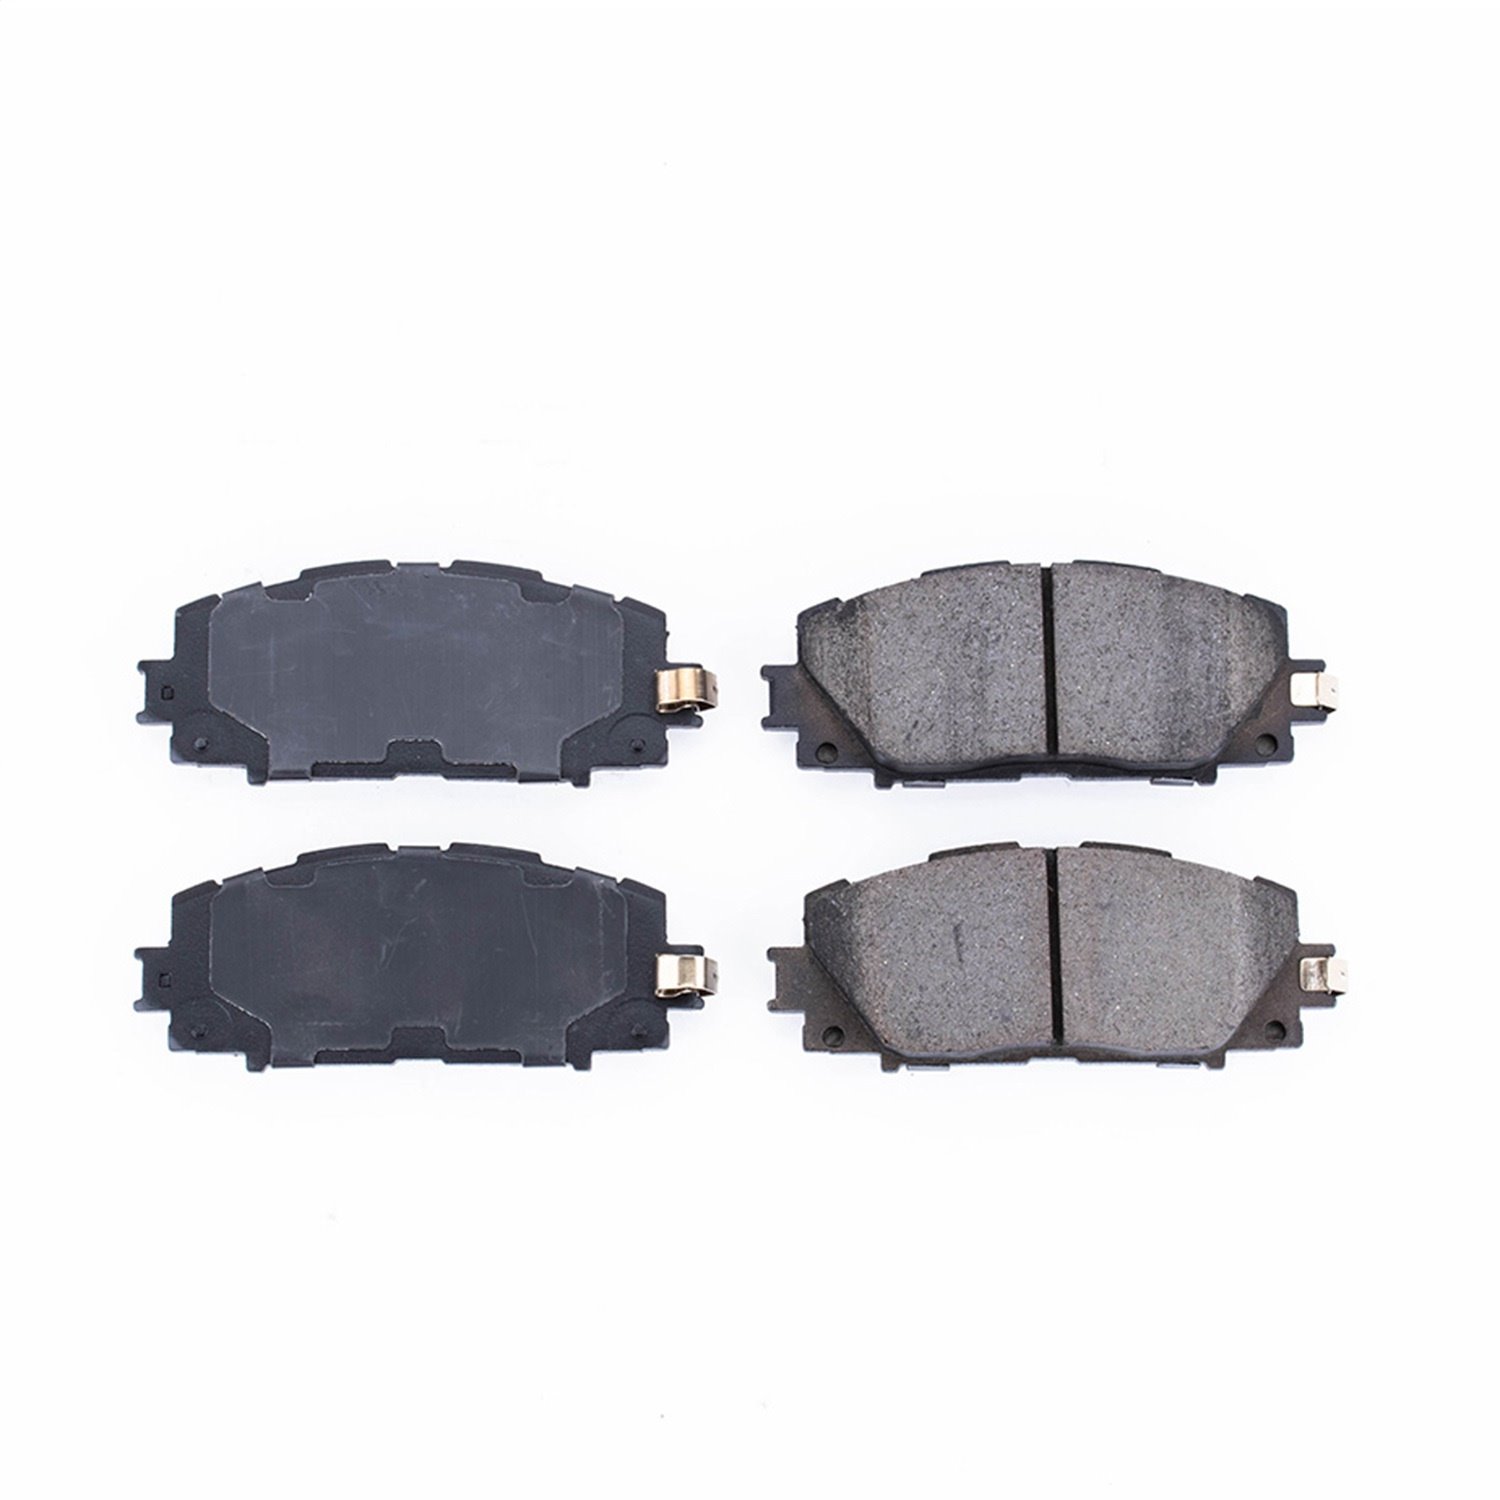 Power Stop s Evolution ceramic is the fastest growing line of brake pads in North America. Technicia